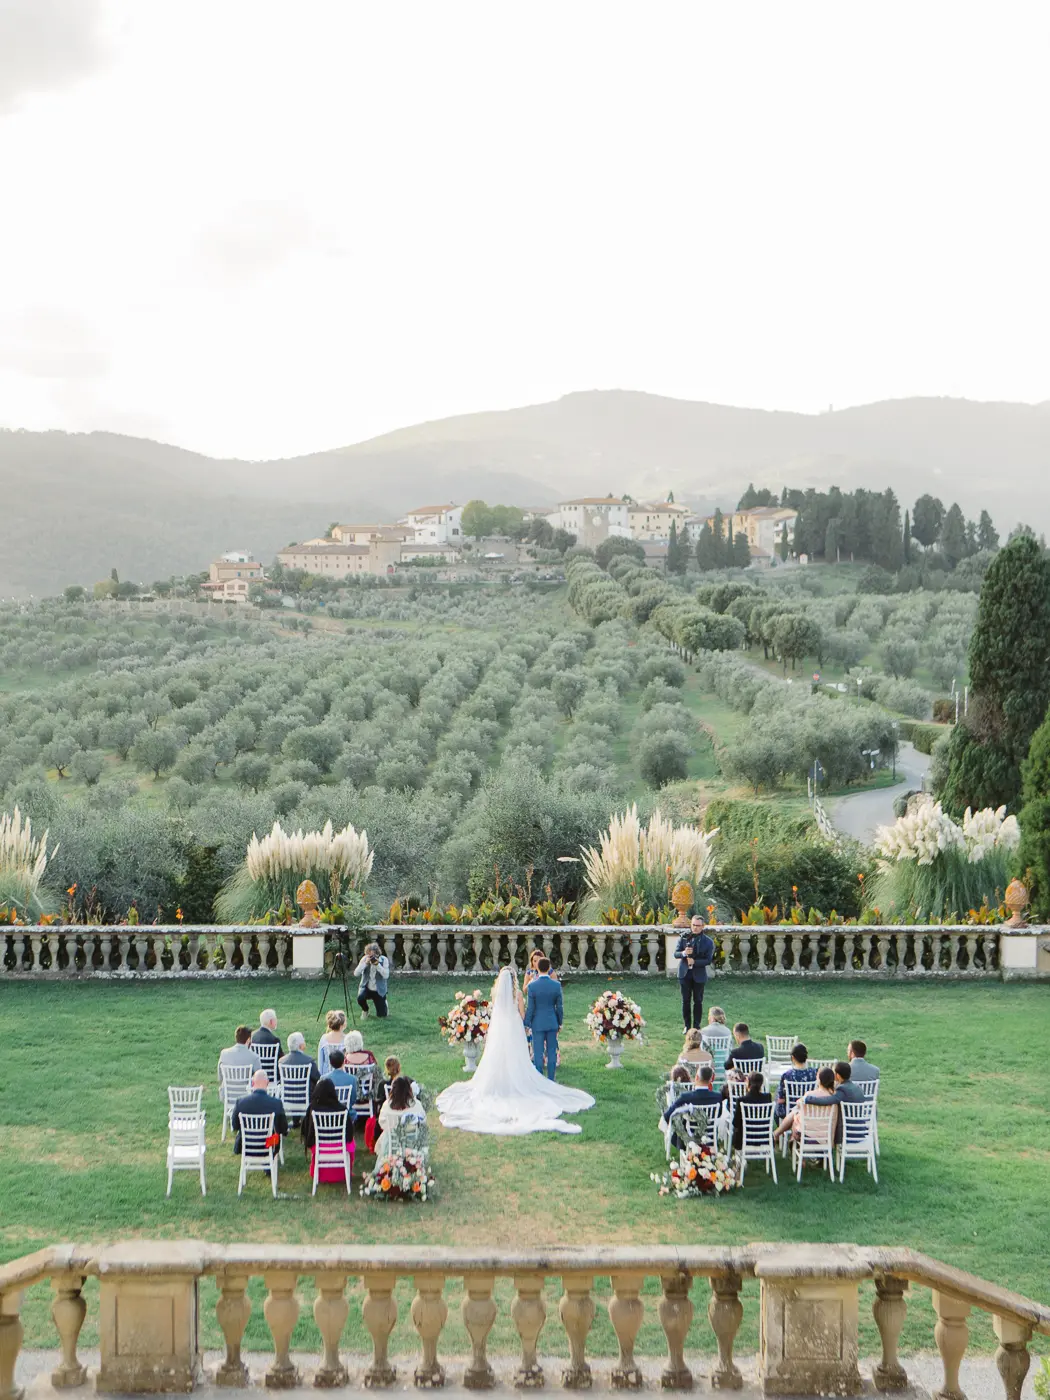 Enchanting Tuscan wedding ceremony at a medieval villa, with the bride and groom exchanging vows amidst the timeless charm of the historic architecture and rolling hills